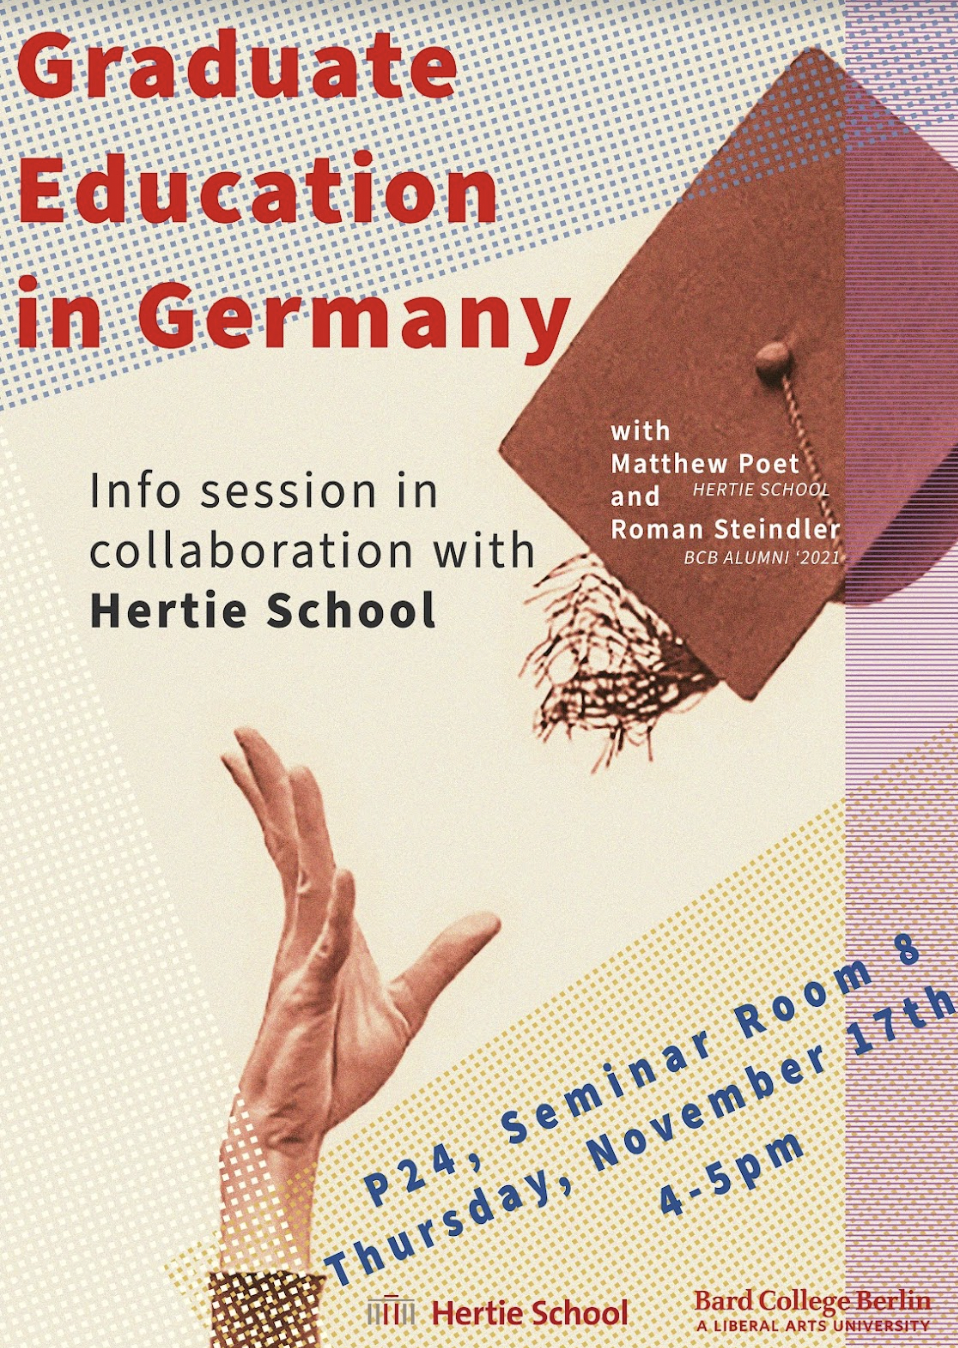 Graduate Education in Germany Info Session (with the Hertie School)